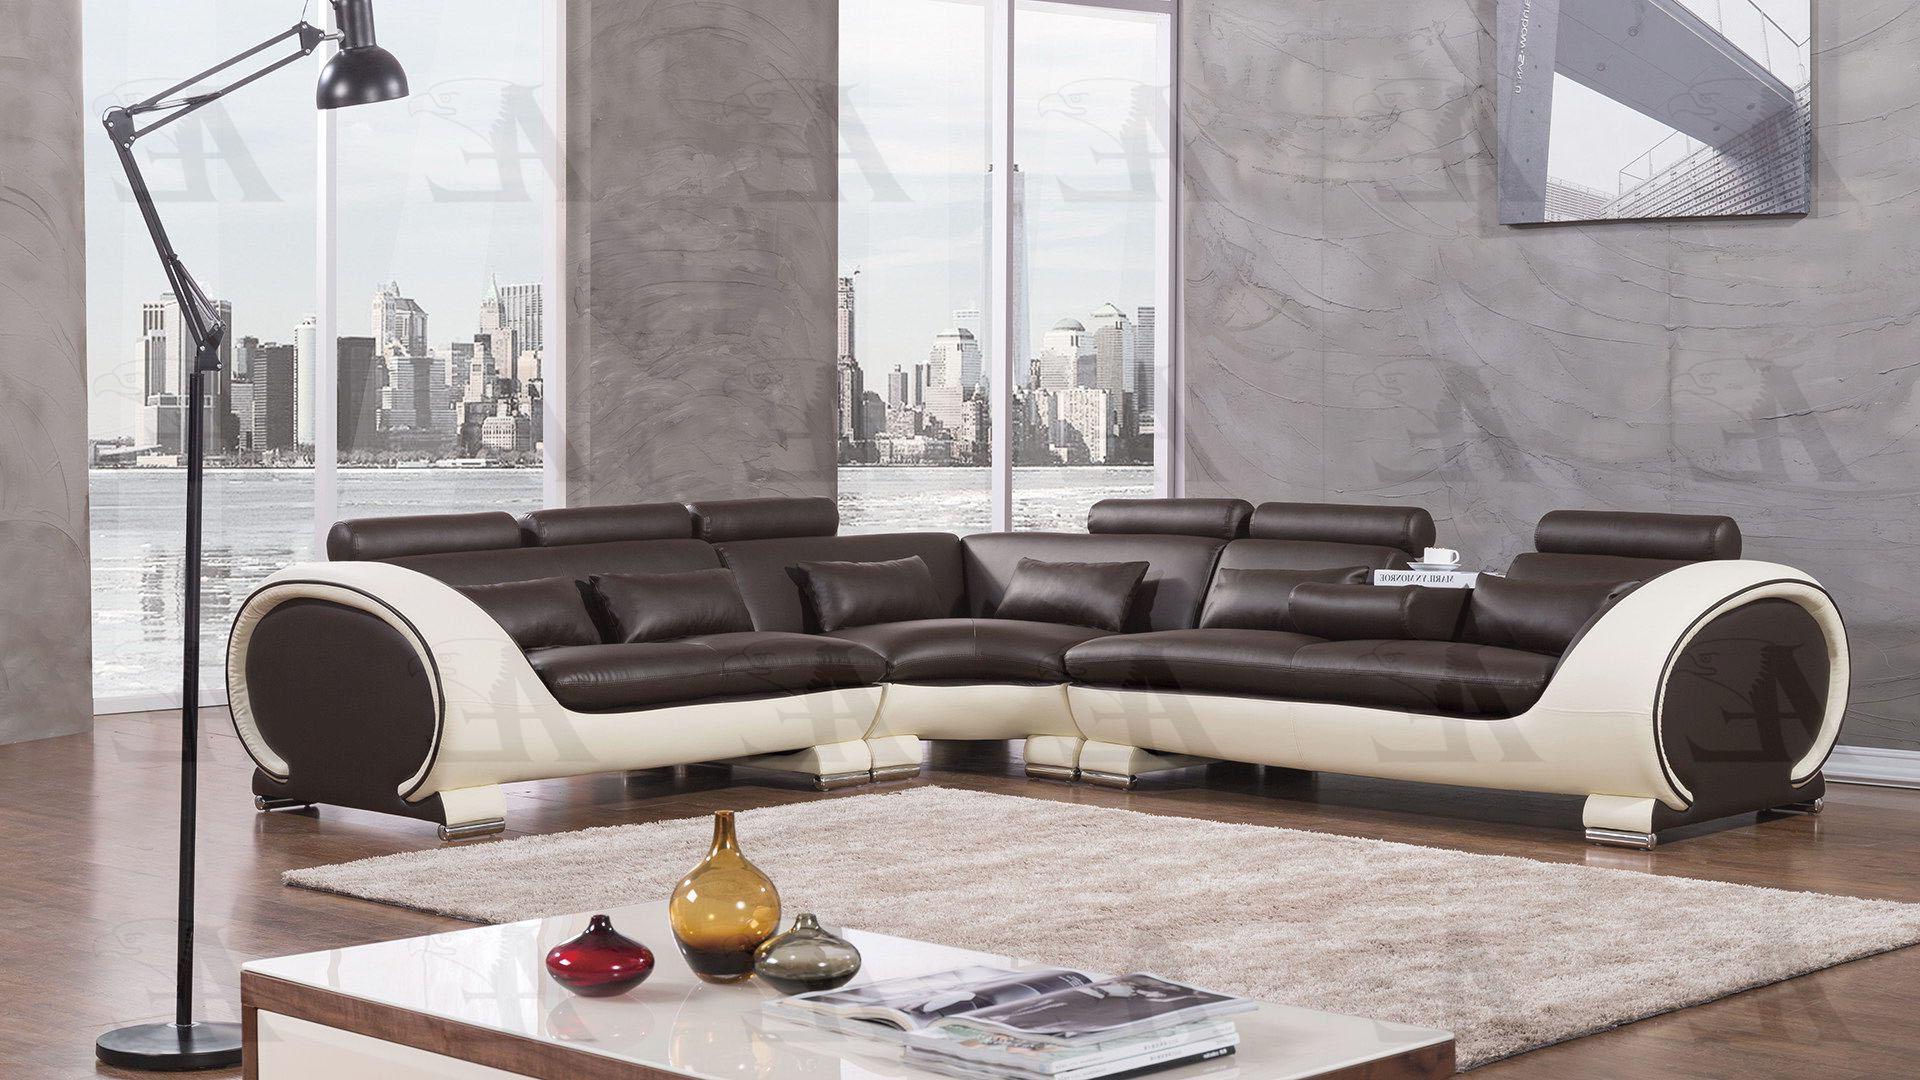 Contemporary, Modern Sectional Sofa AE-LD801-DC.CRM AE-LD801L-DC.CRM in Dark Chocolate, Cream Bonded Leather